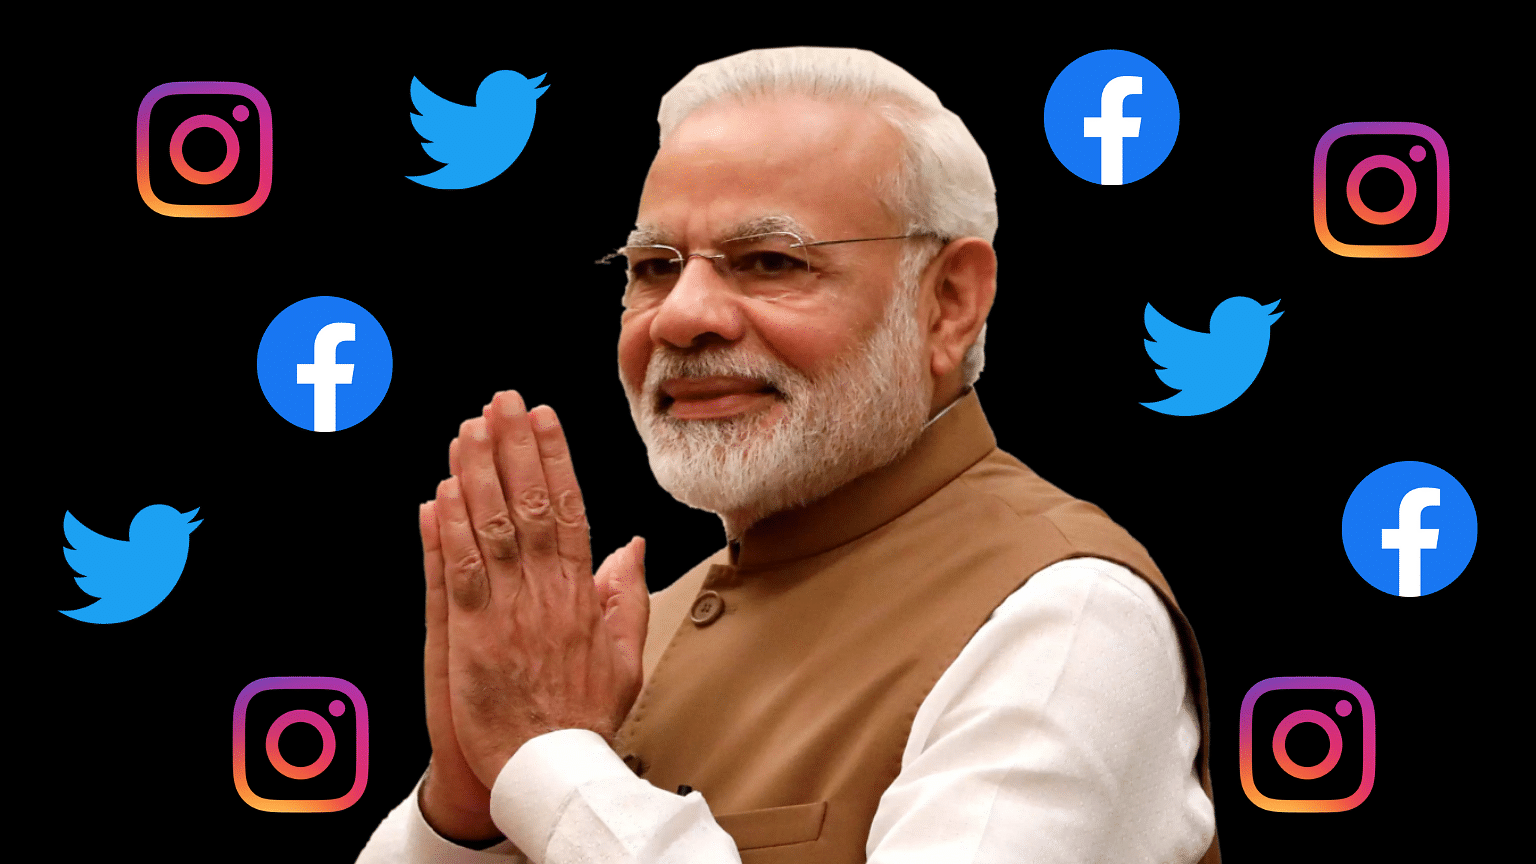 The Modi government has asked colleges to connect their students’ social media  to the social media accounts of the HRD Ministry.